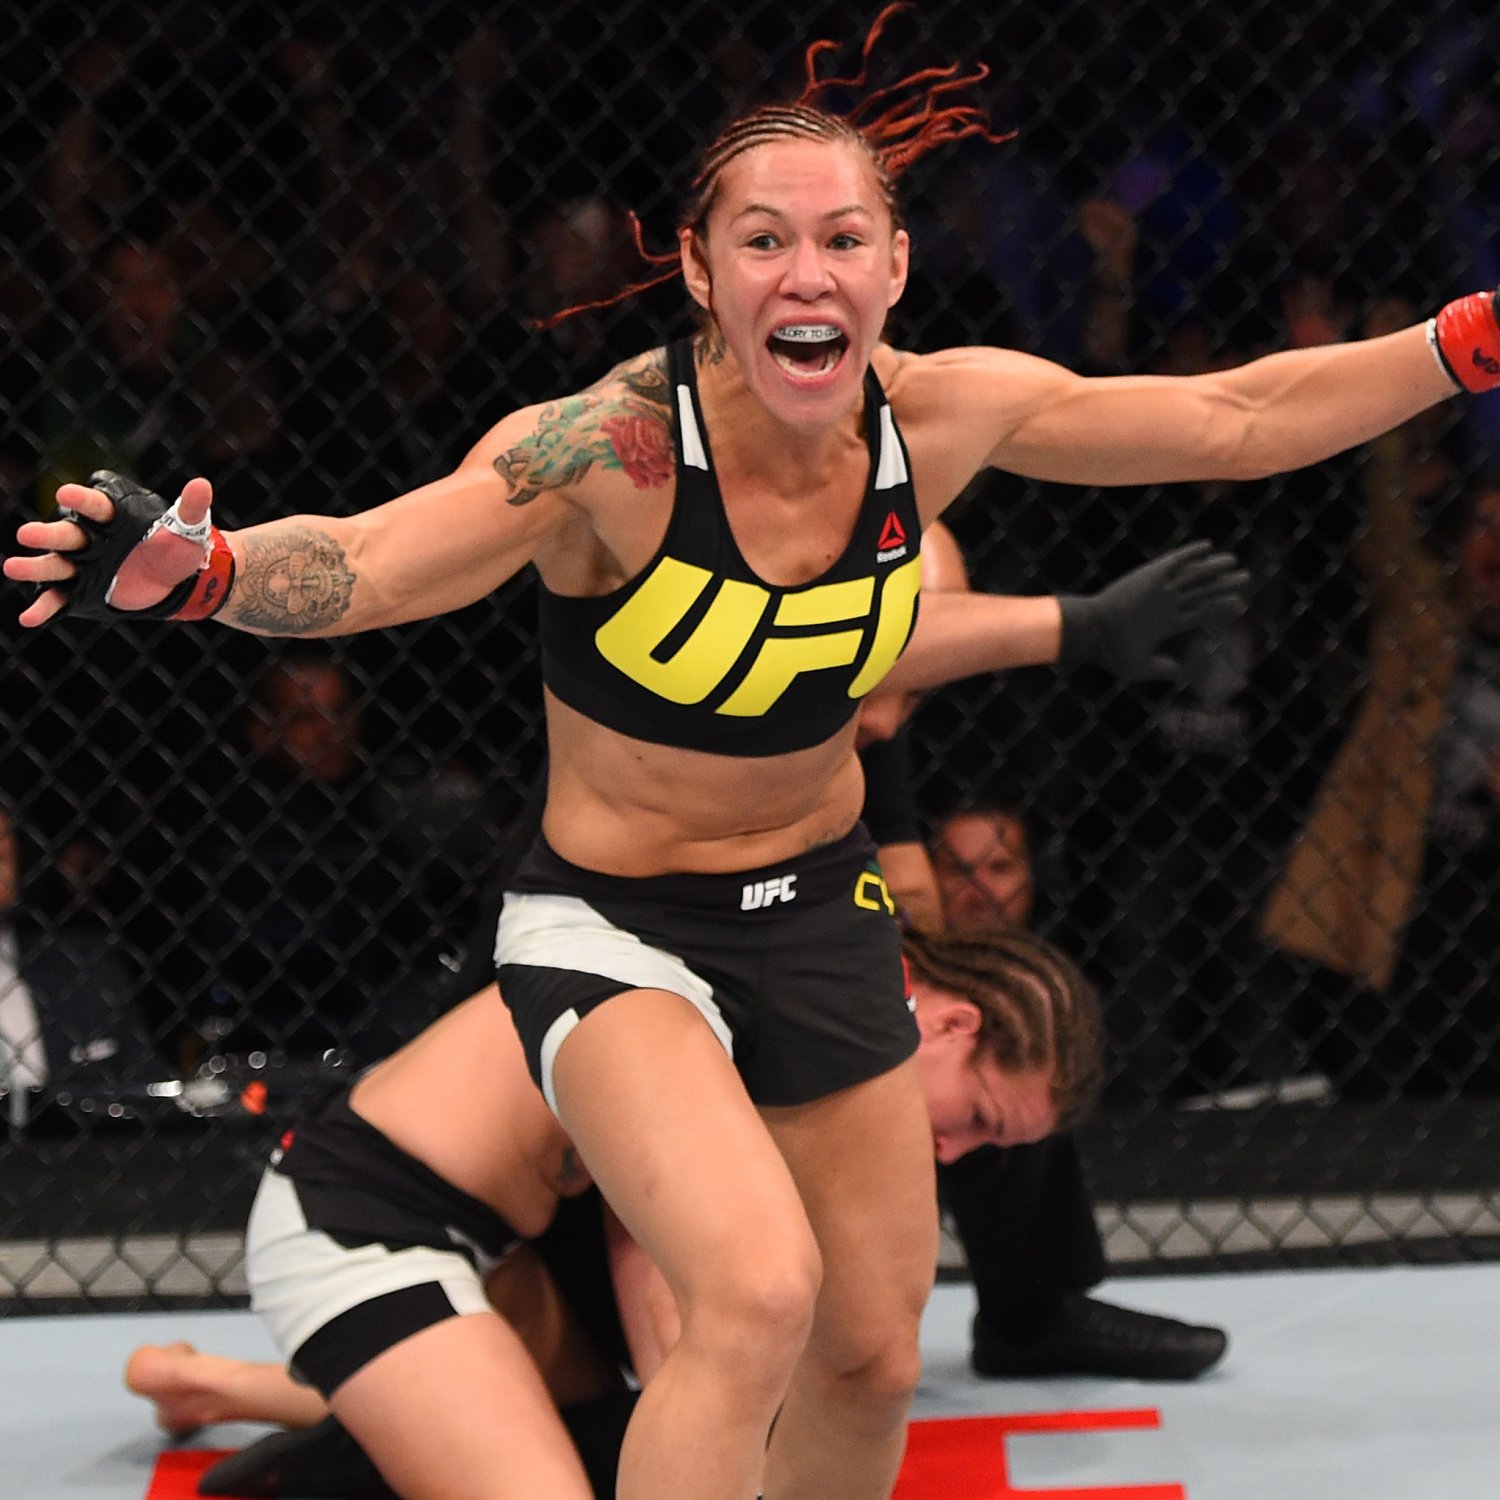 The Complete Guide to UFC Fight Night 95: Cyborg vs. Lansberg